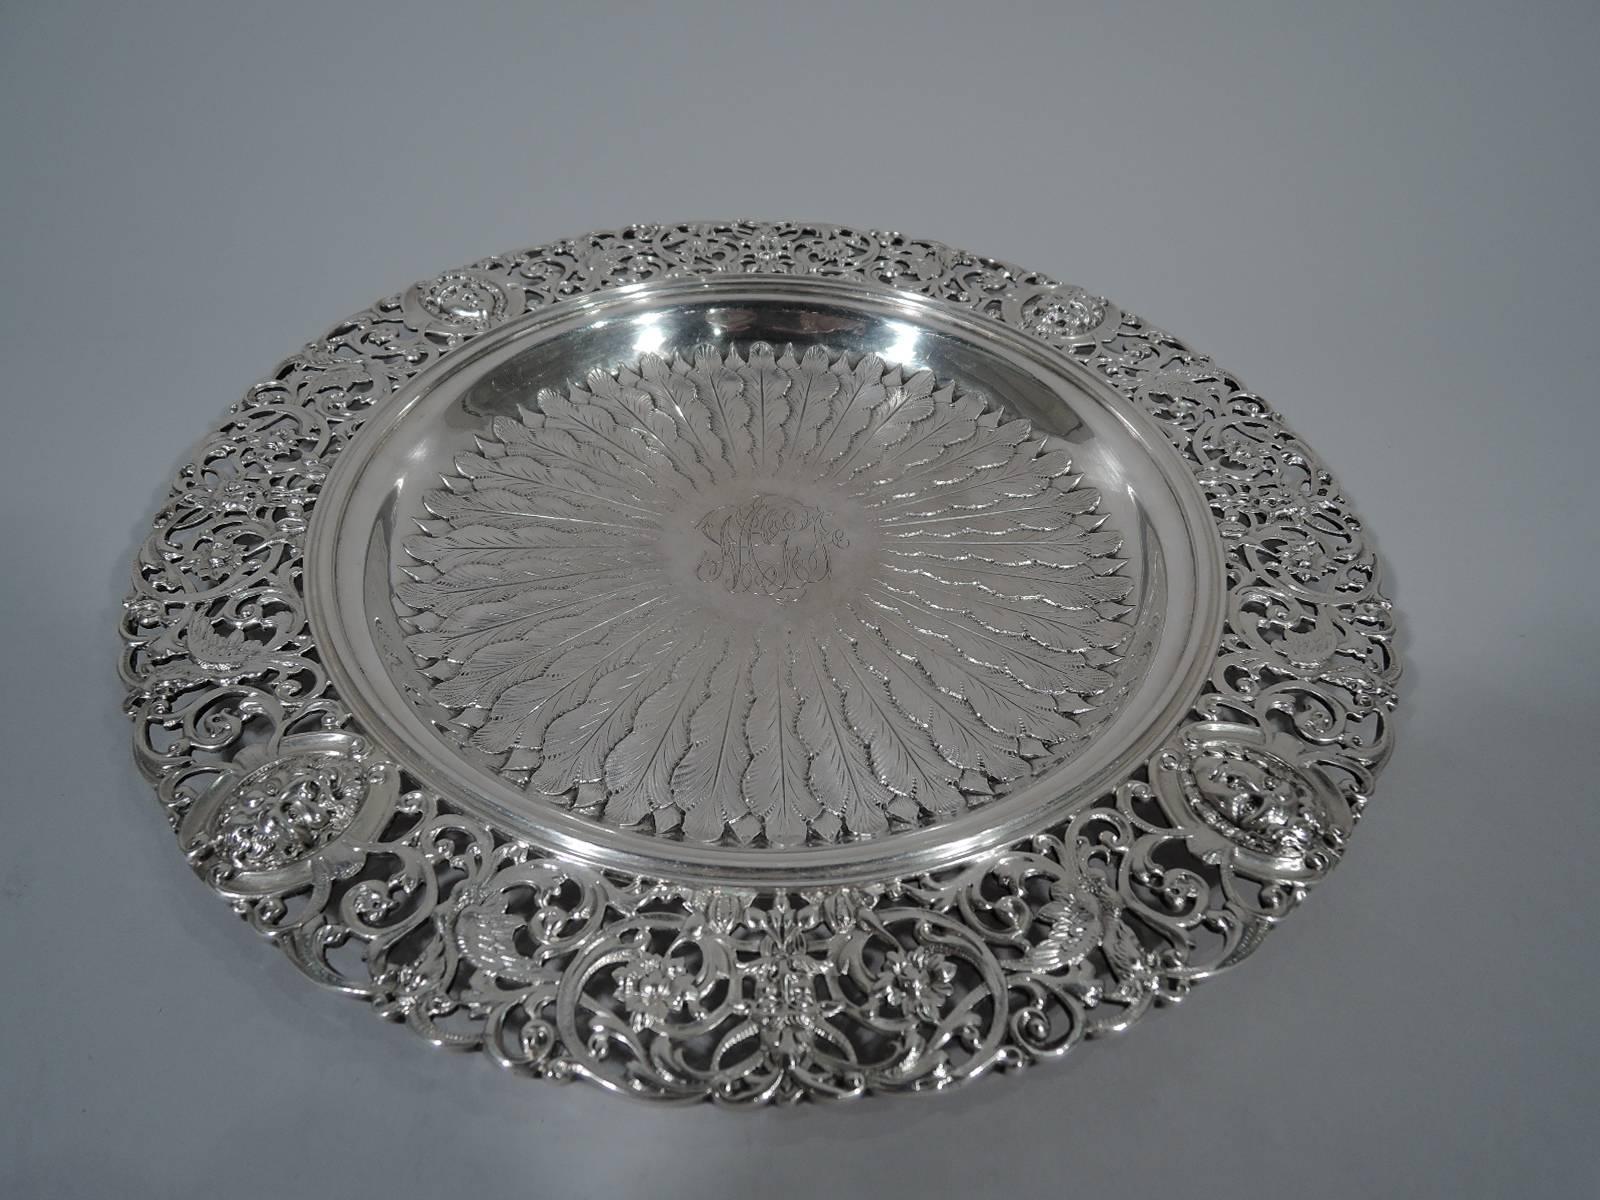 Pair of Renaissance Revival sterling silver trays. Made by Howard & Co. in New York in 1894. Each: Shallow well with chased radiating leaves and central frame with engraved interlaced script monogram. Wide pierced rim with Classical masks, gryphons,